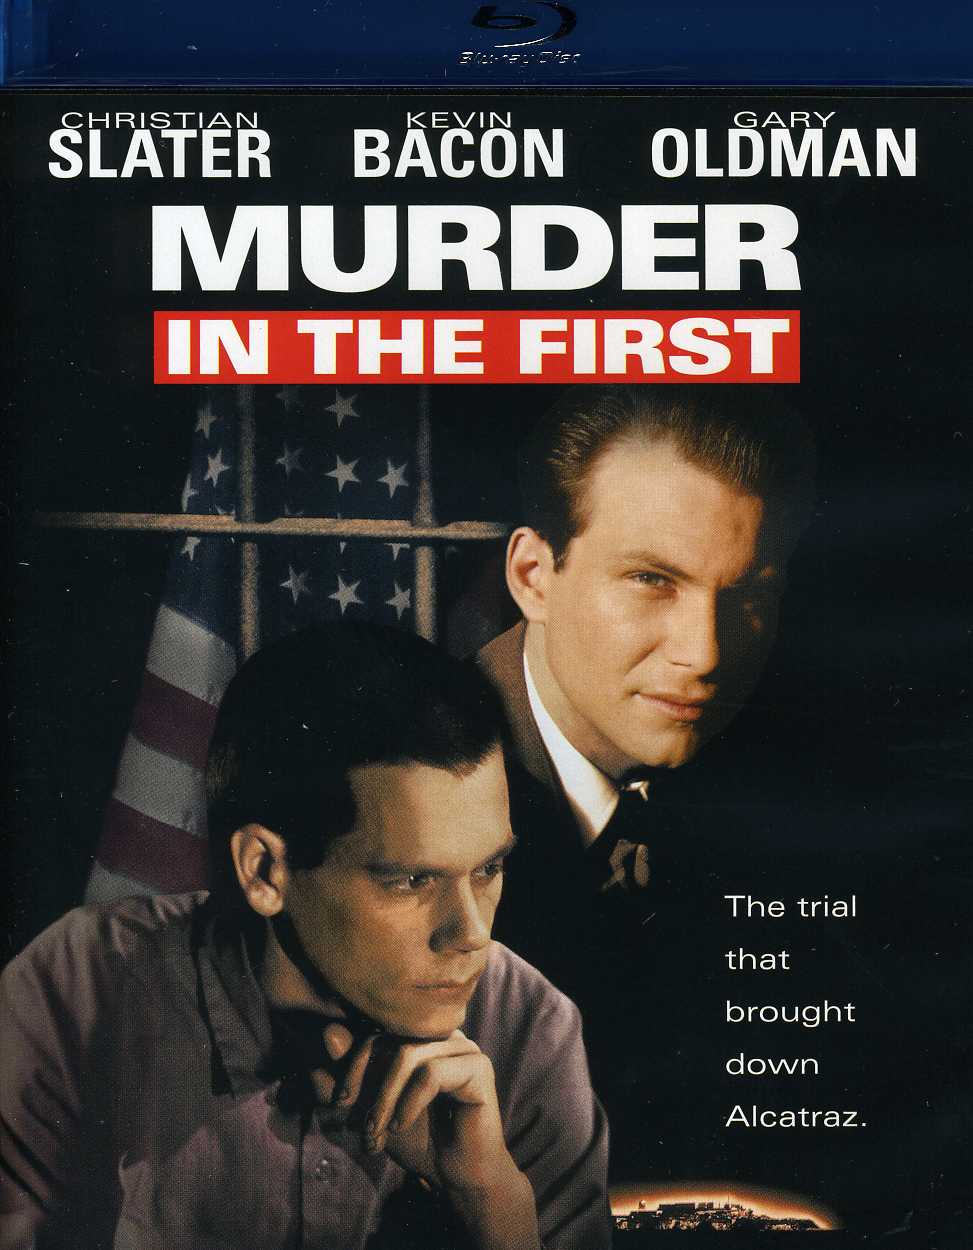 MURDER IN THE FIRST